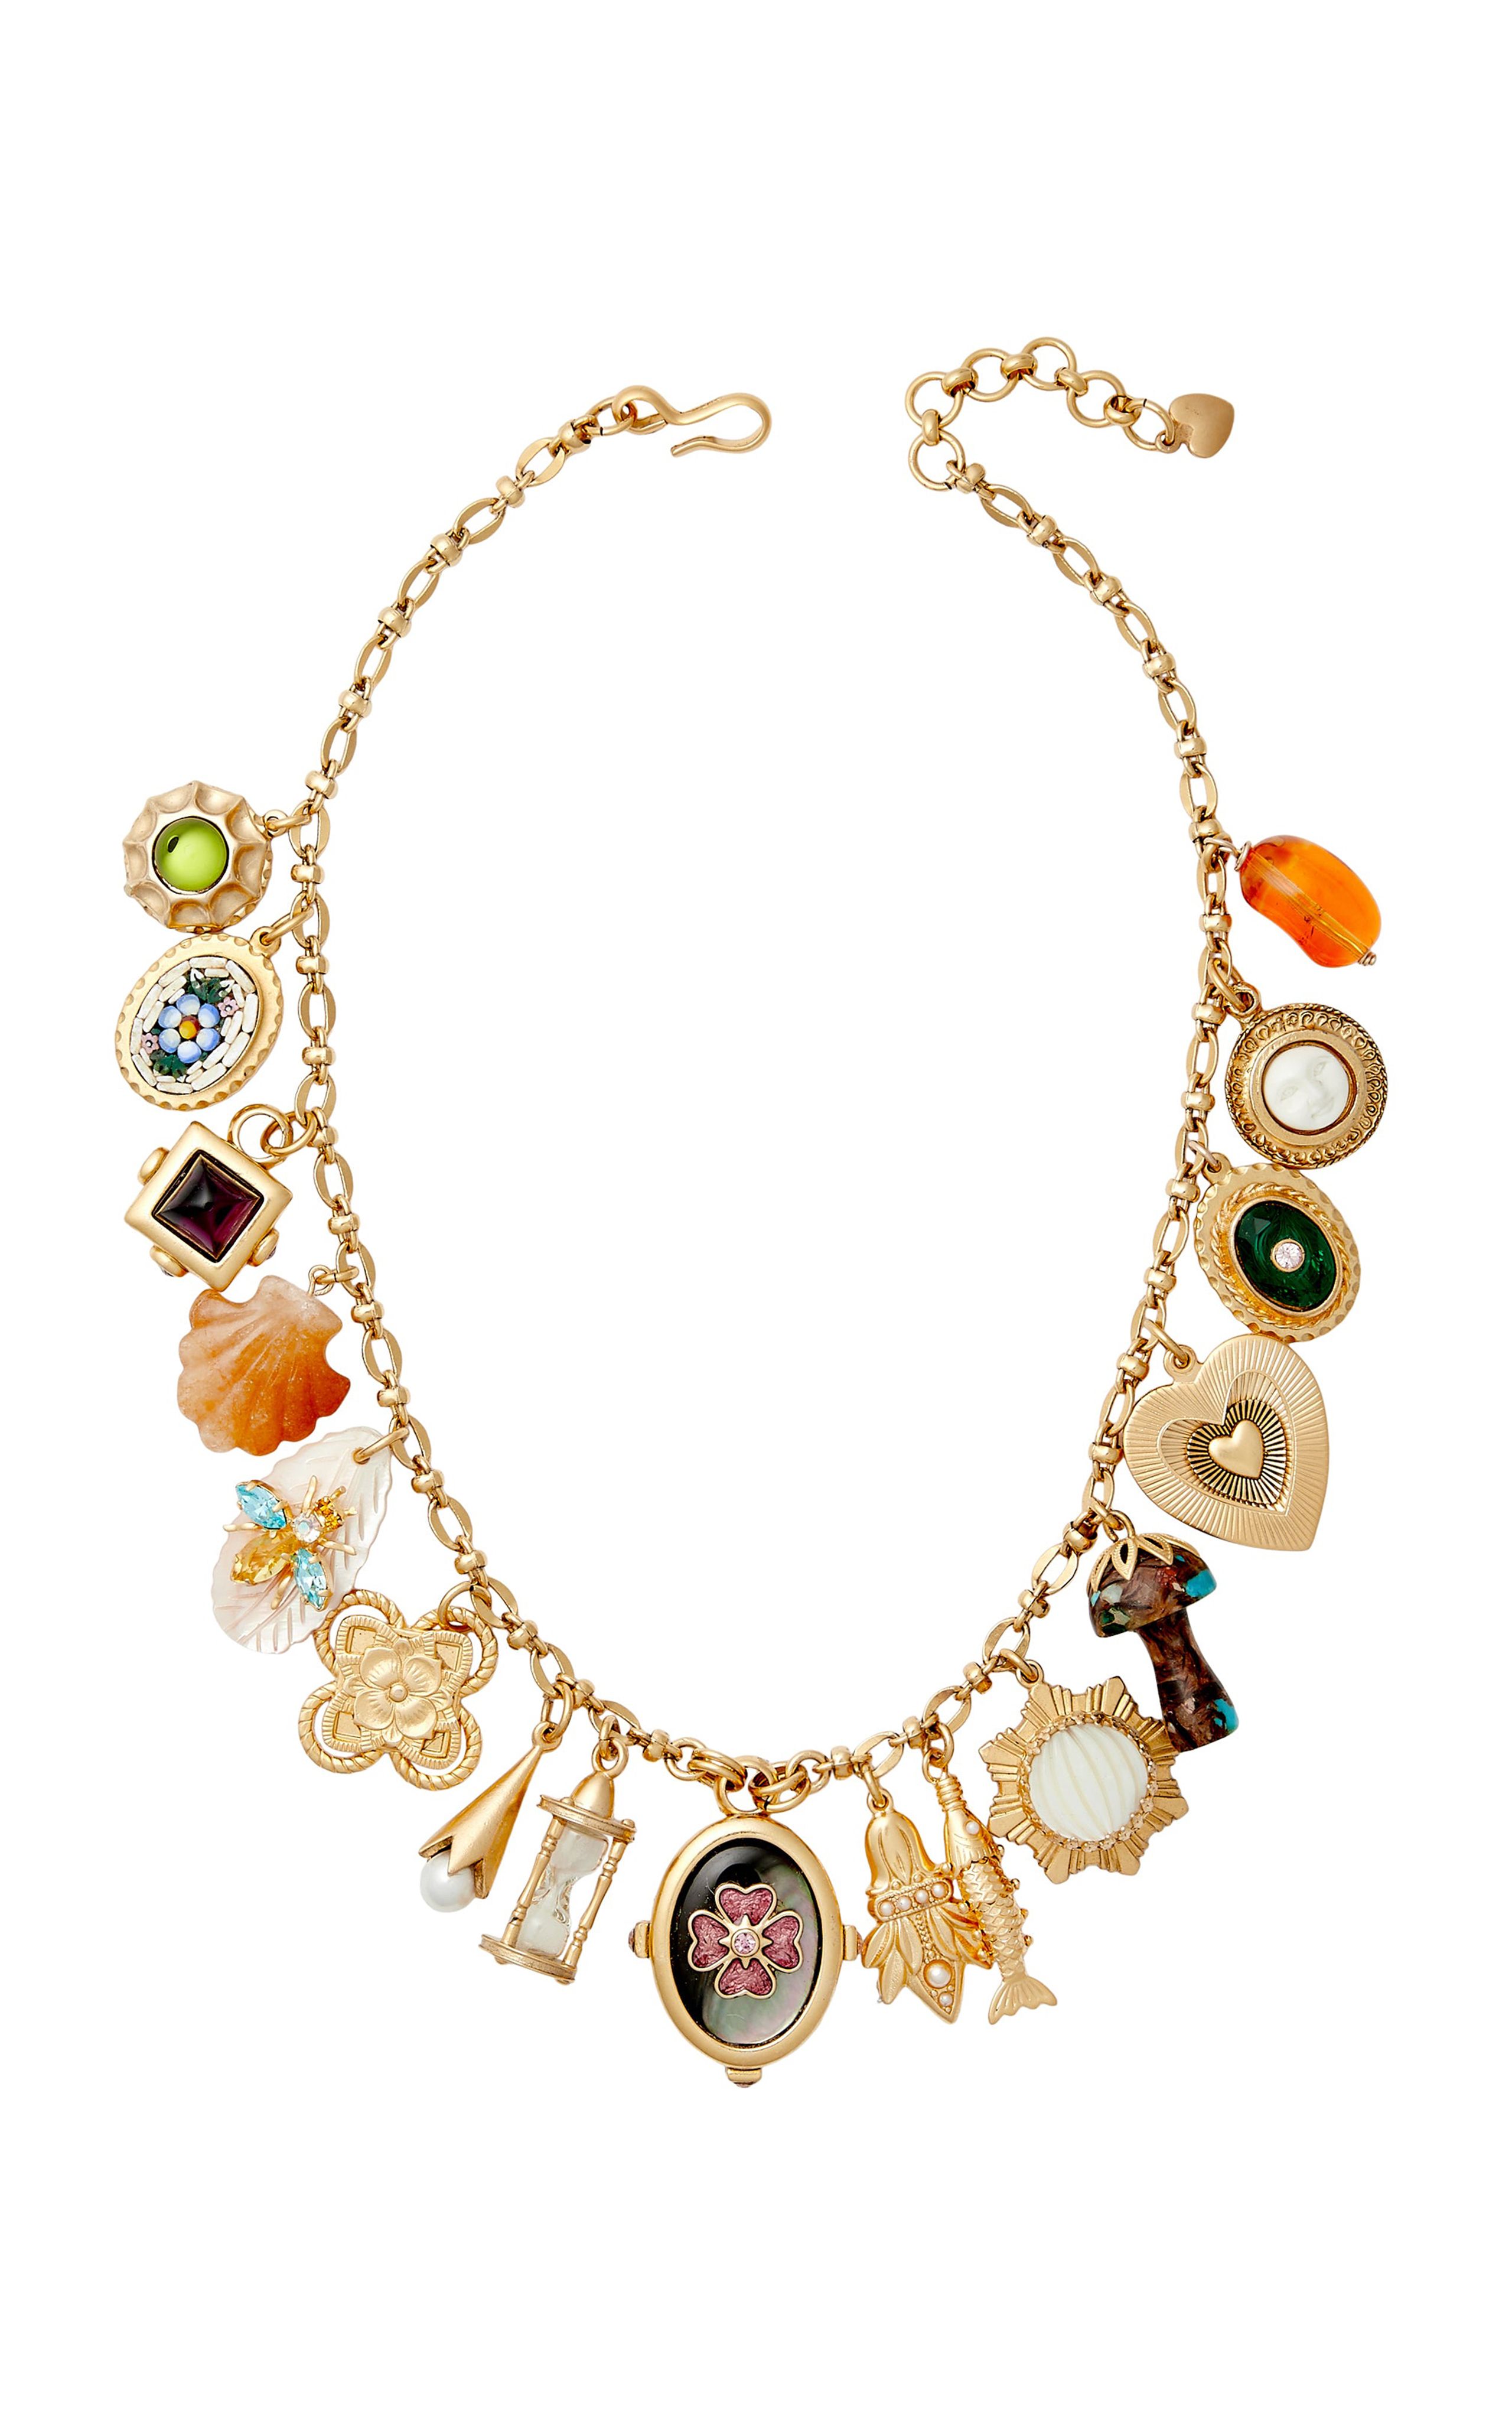 One-of-a-Kind Love Note 24K Gold-Plated Necklace | Moda Operandi (Global)